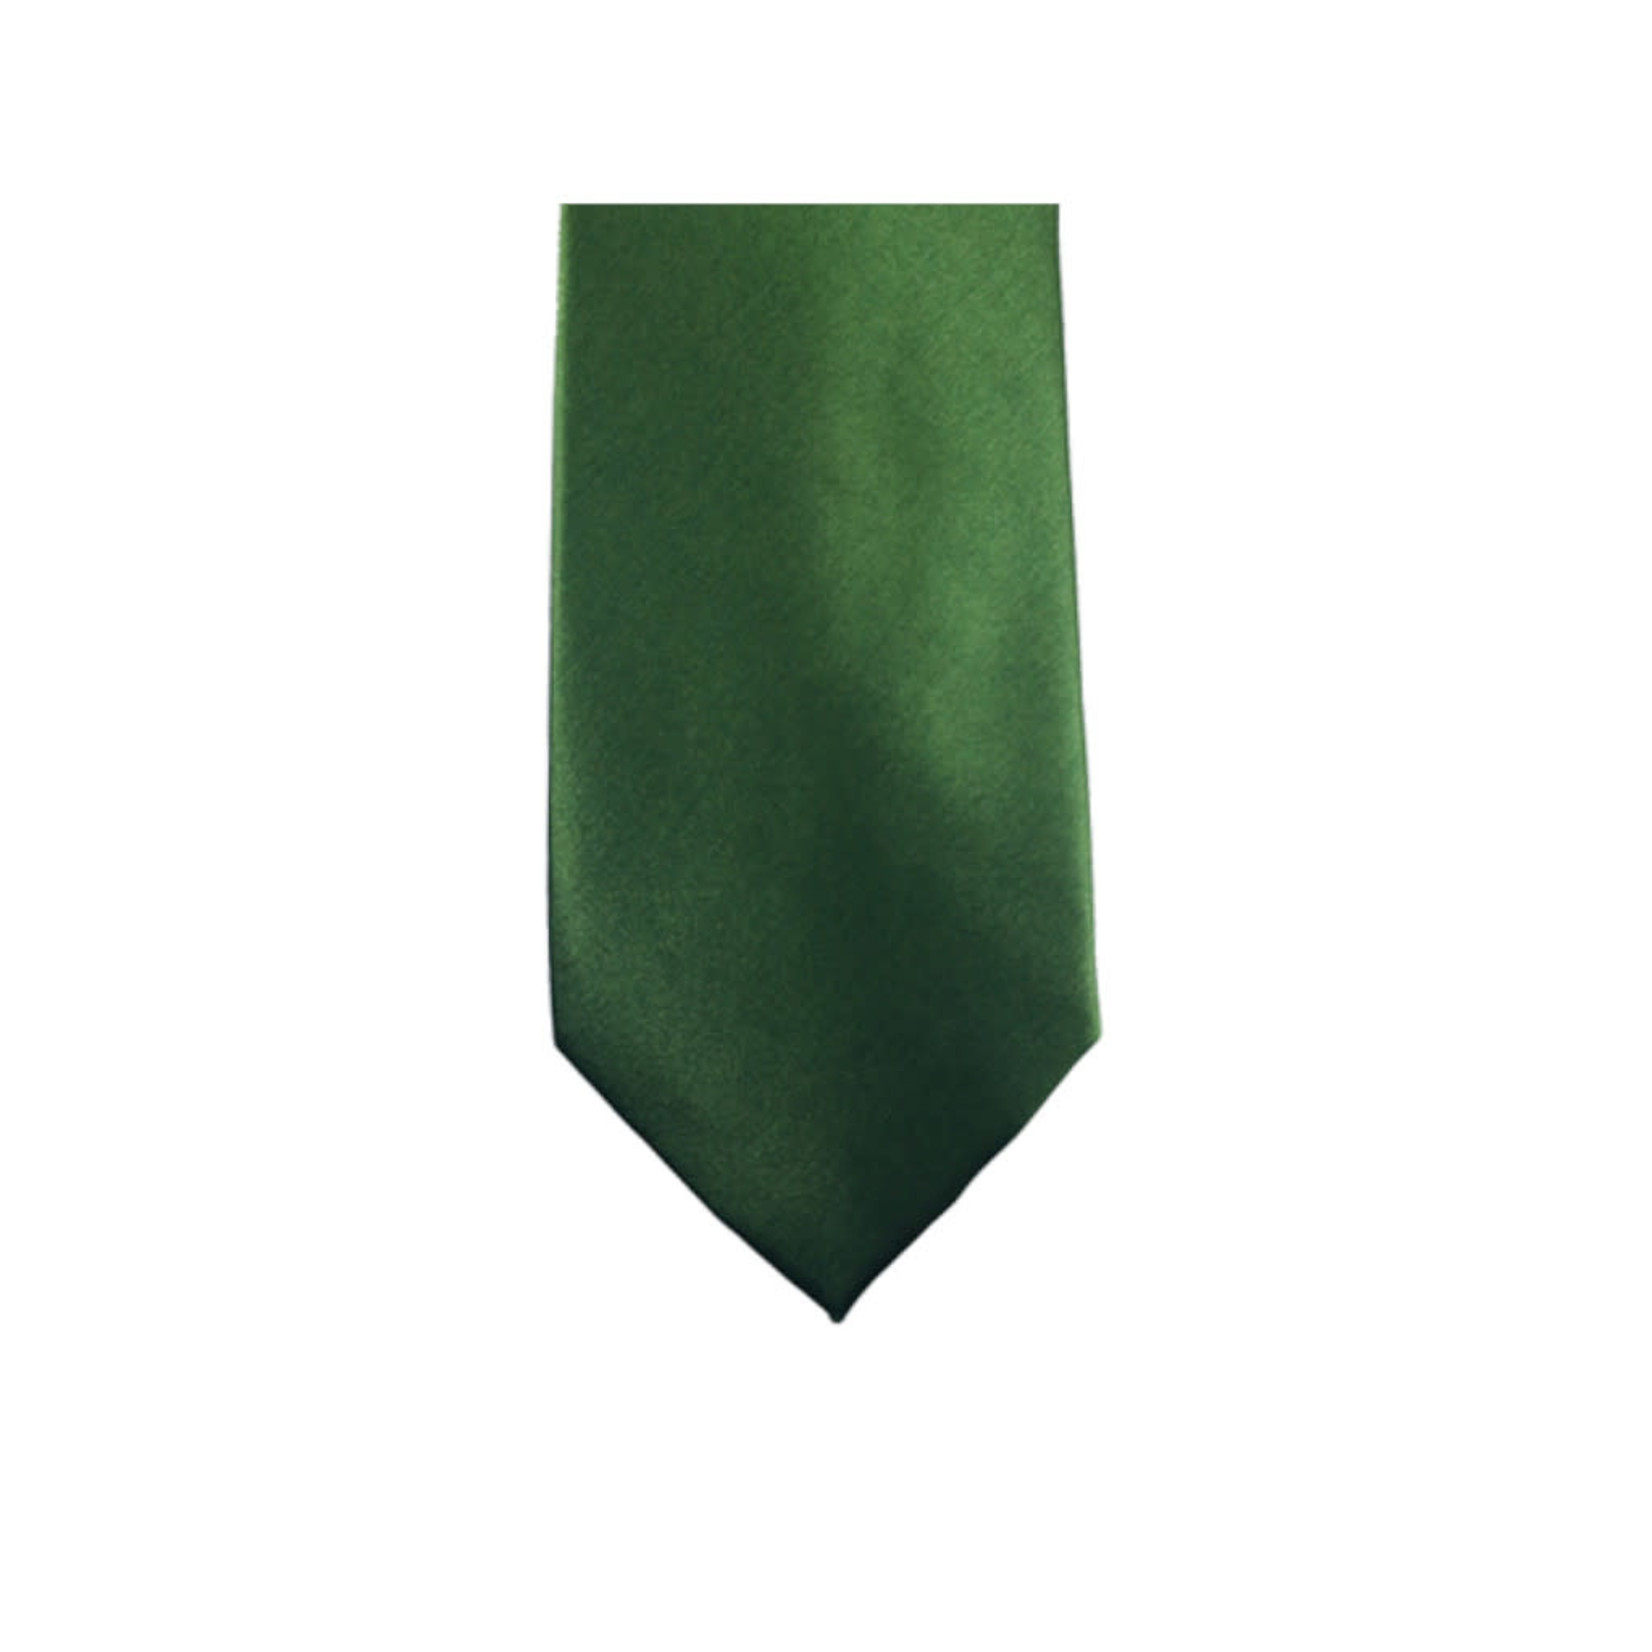 Luciano Knotz M100-25 Solid Green Tie